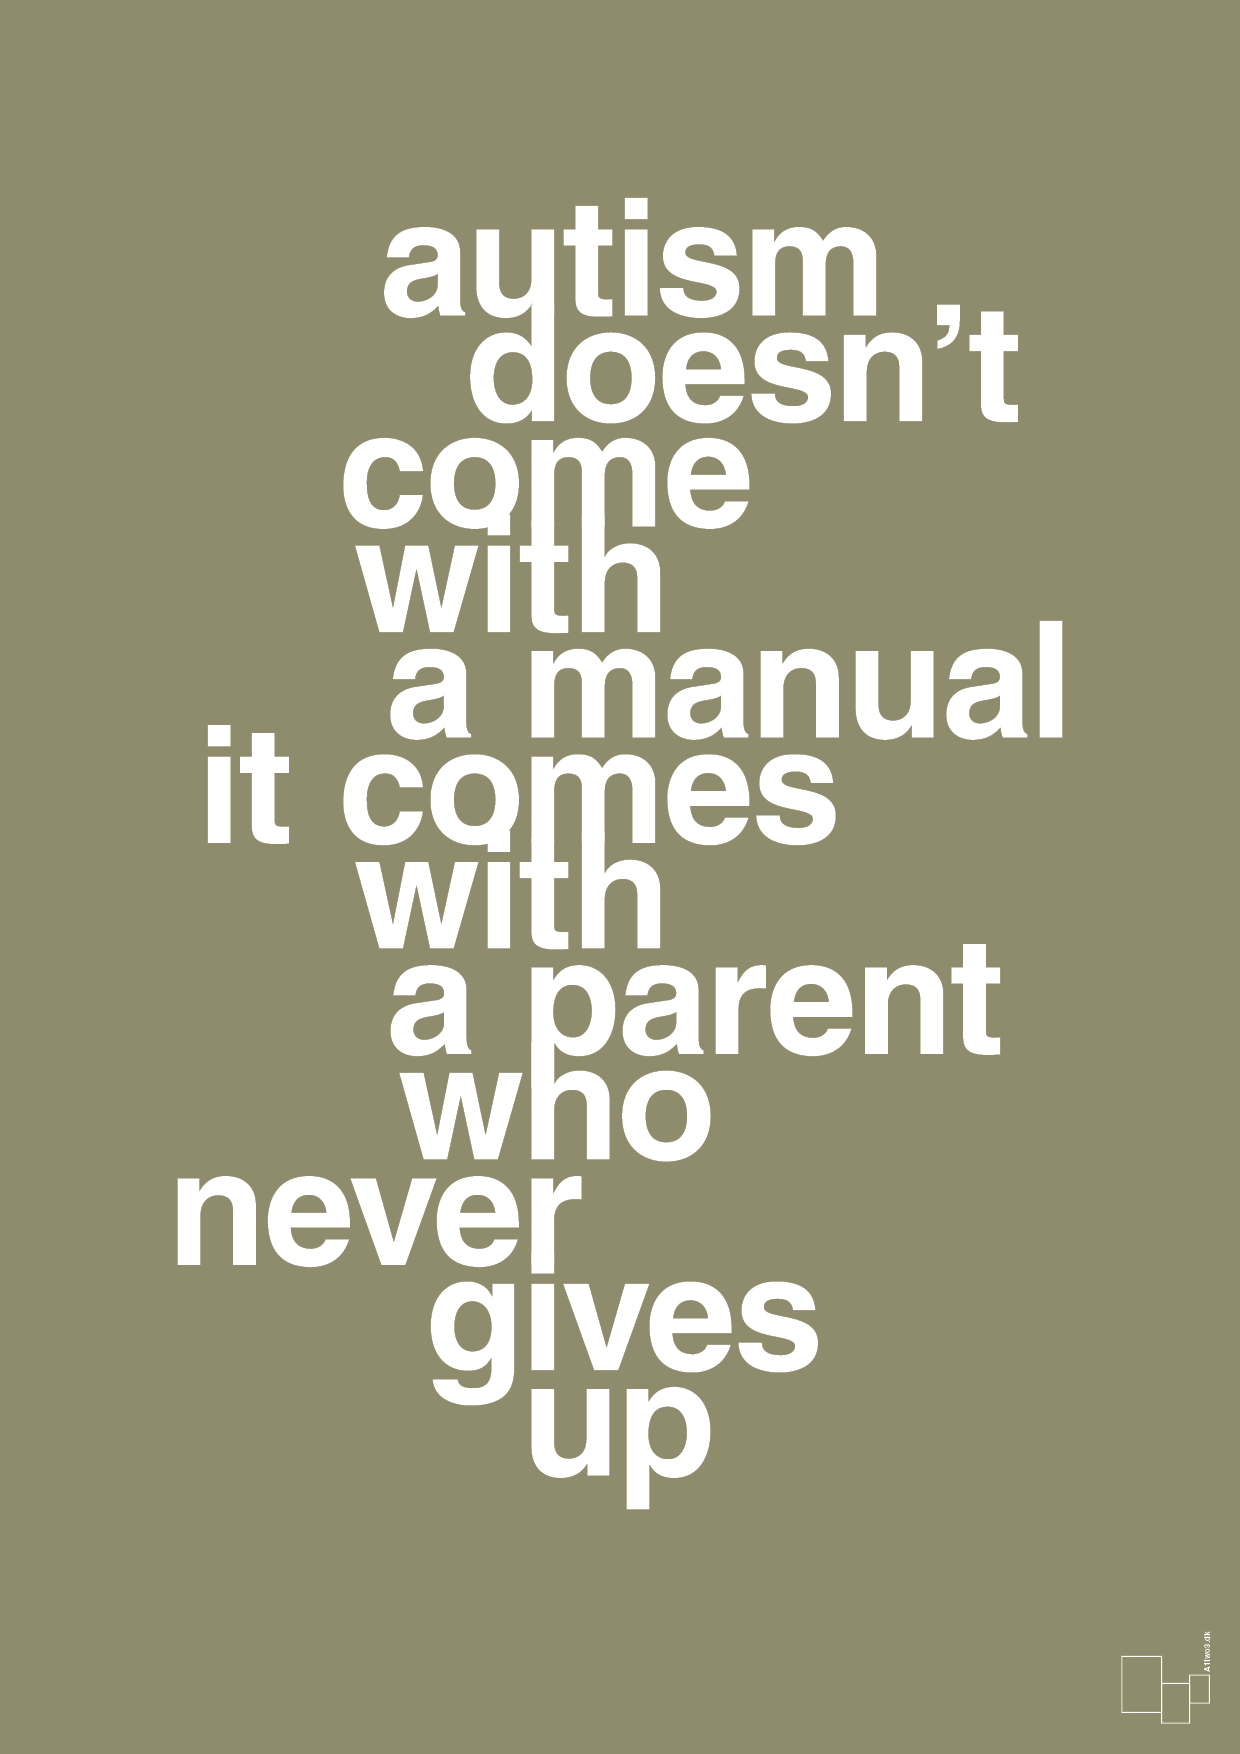 autism doesnt come with a manual it comes with a parent who never gives up - Plakat med Samfund i Misty Forrest